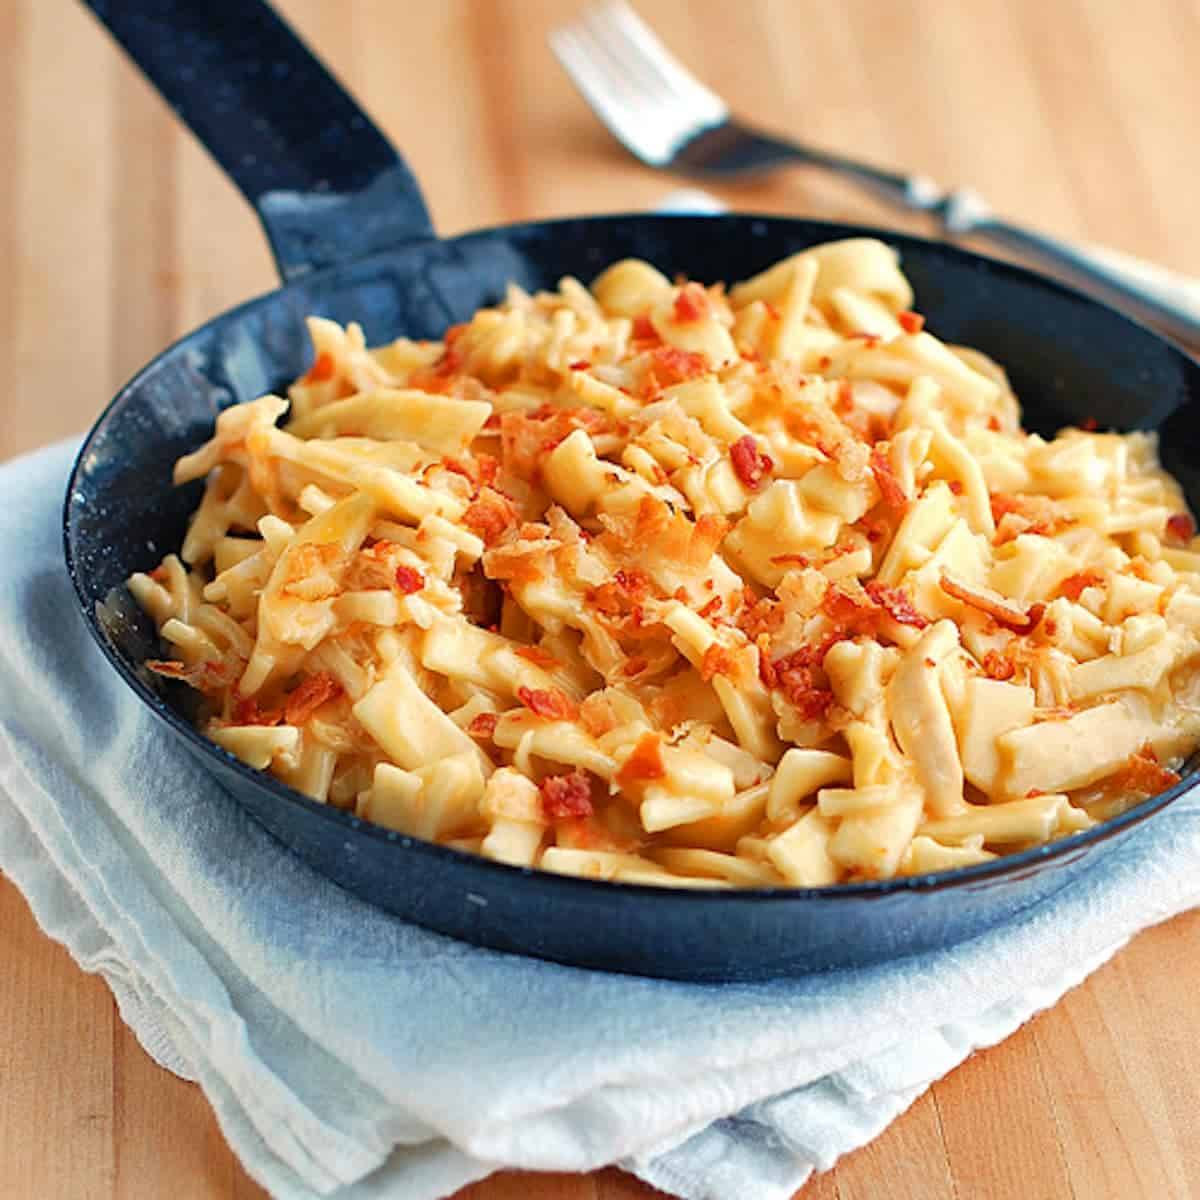 Cheesy chicken noodles coated in a creamy sauce and tossed with shredded chicken in a skillet.